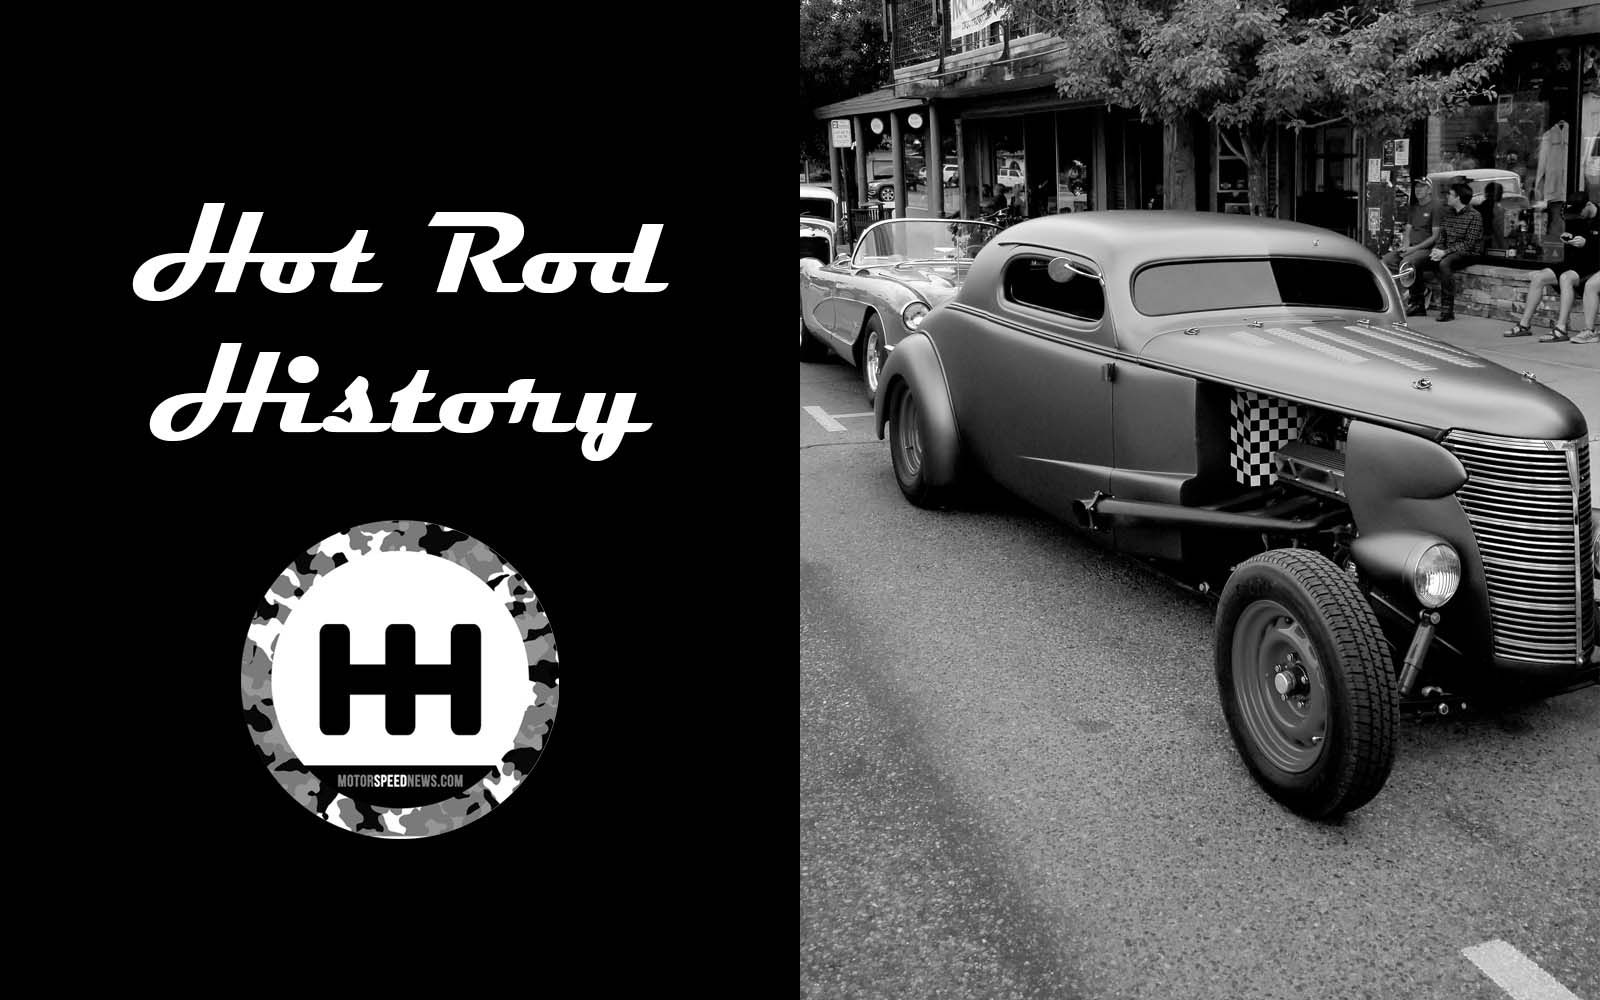 Black and white hot rod with hot rod history title text